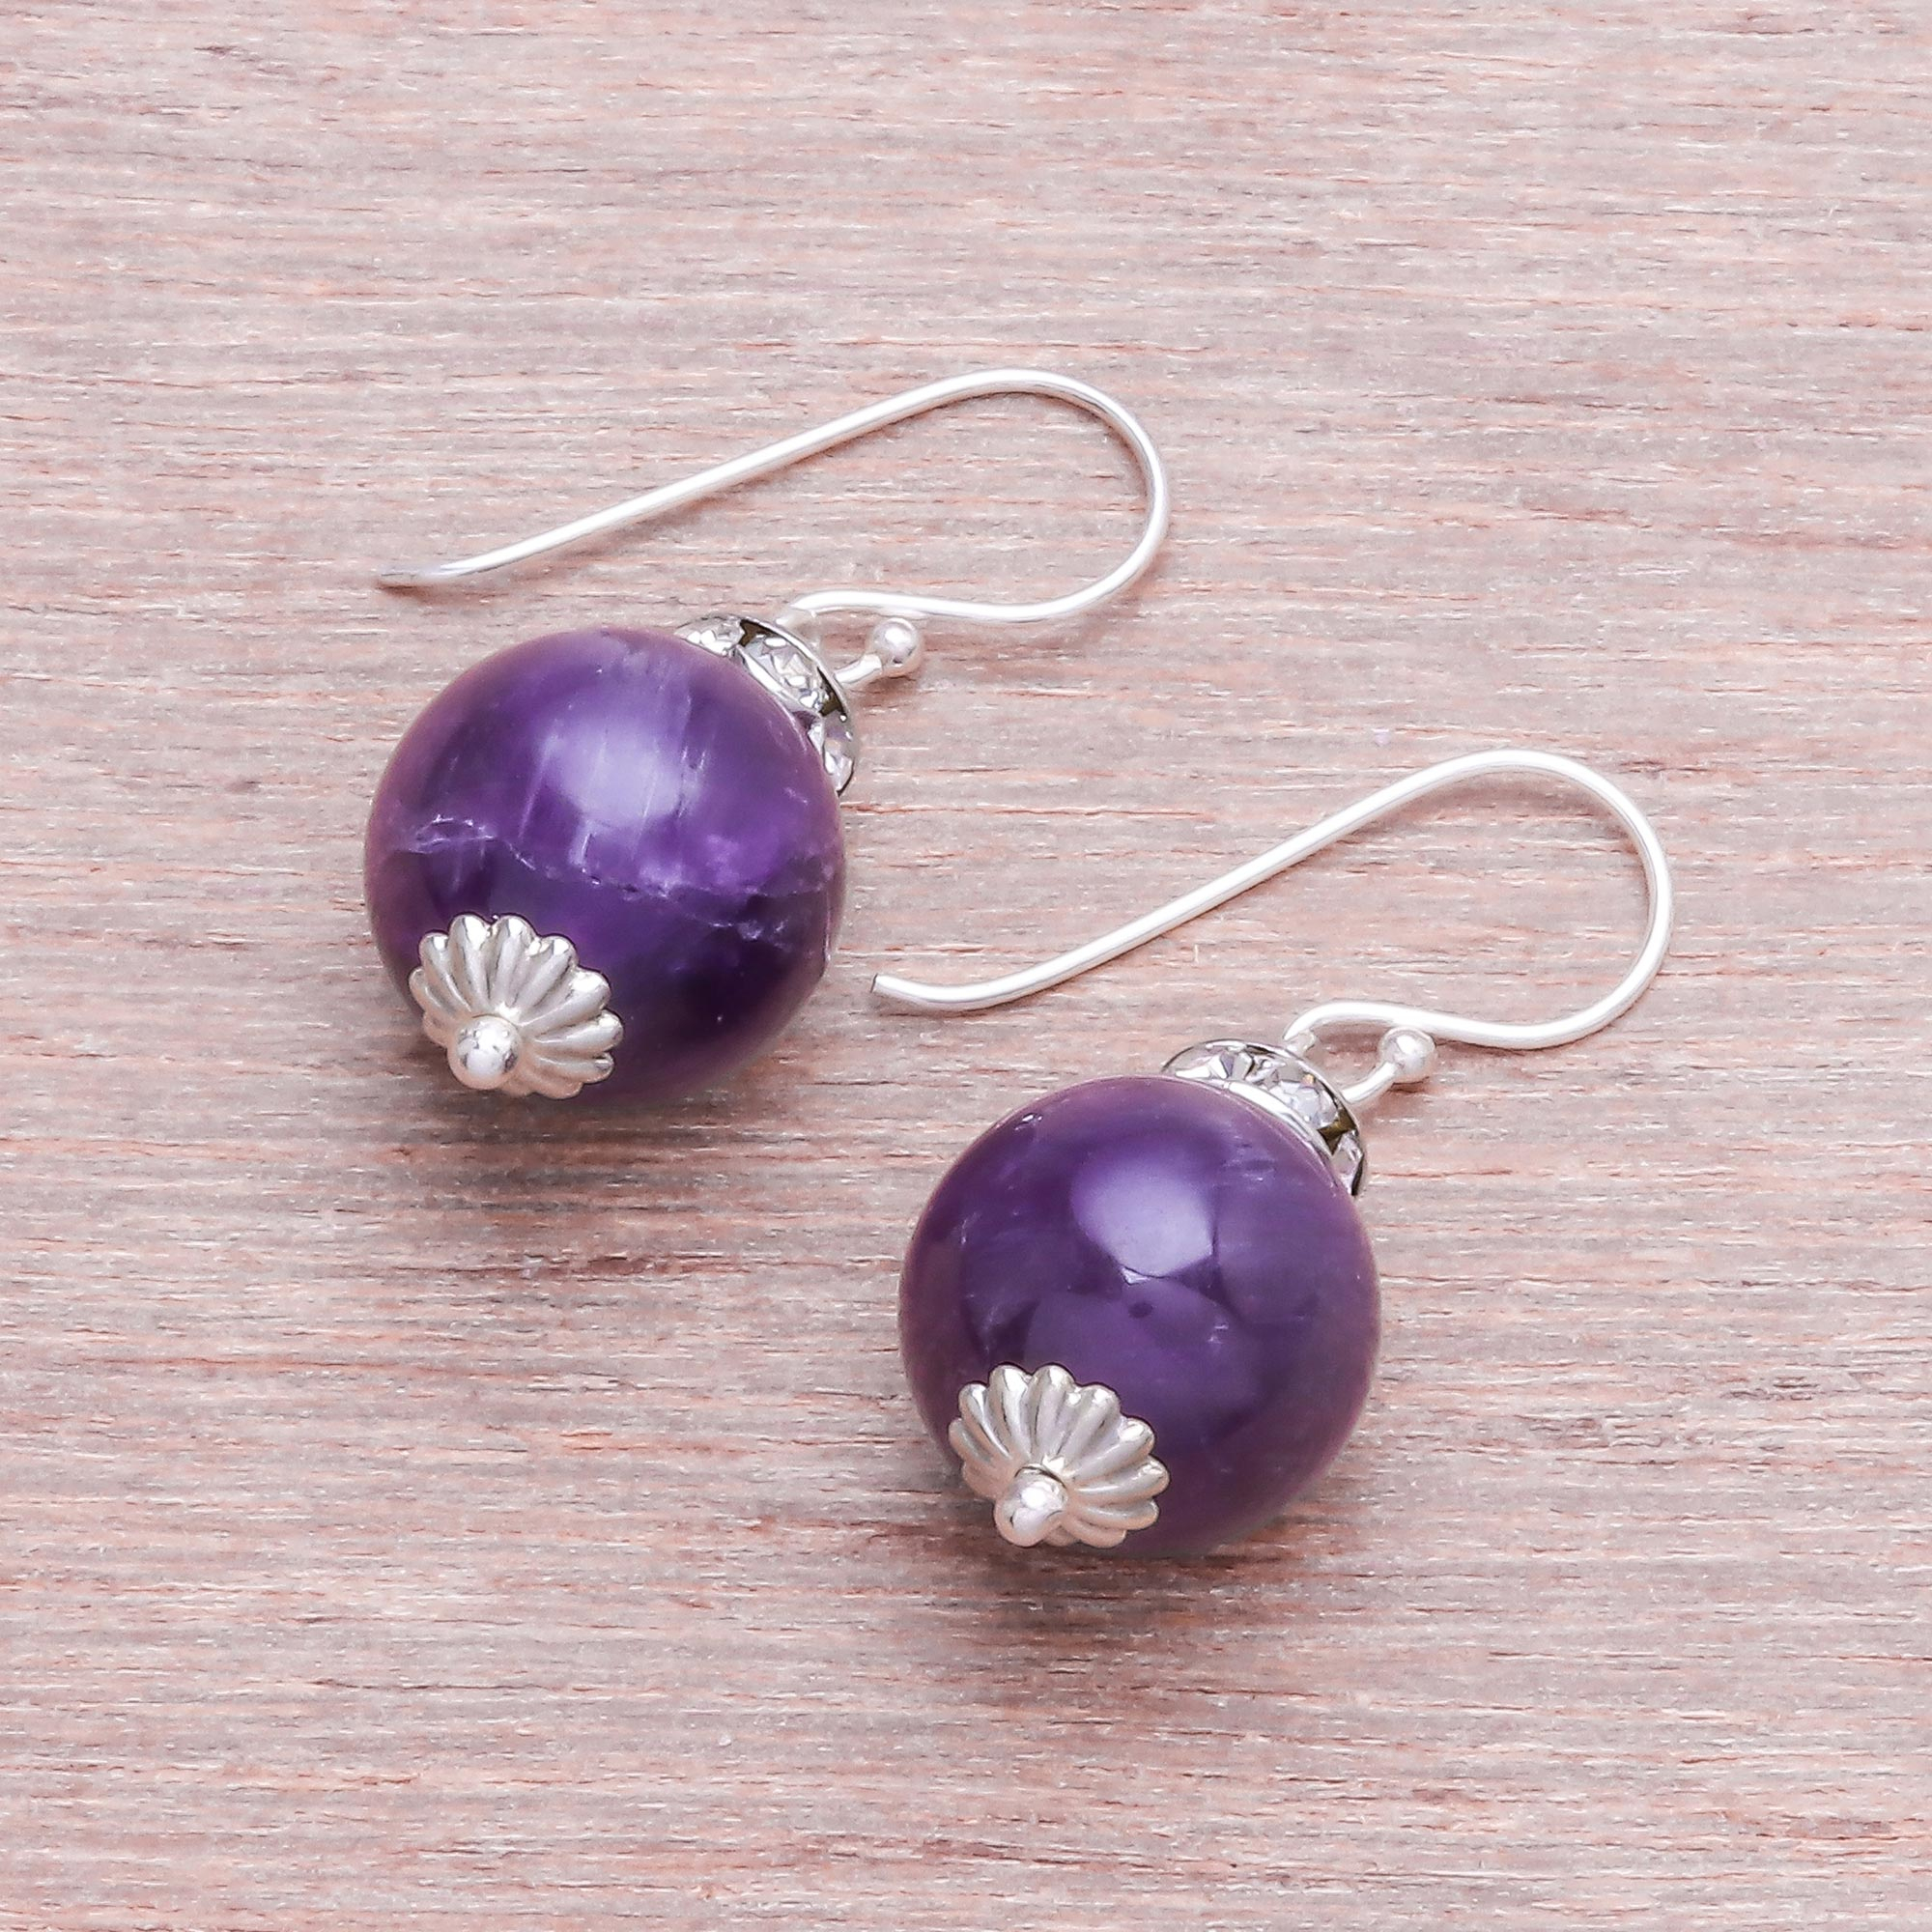 Amethyst and 925 Silver Dangle Earrings from Thailand - Perfect Orbs ...